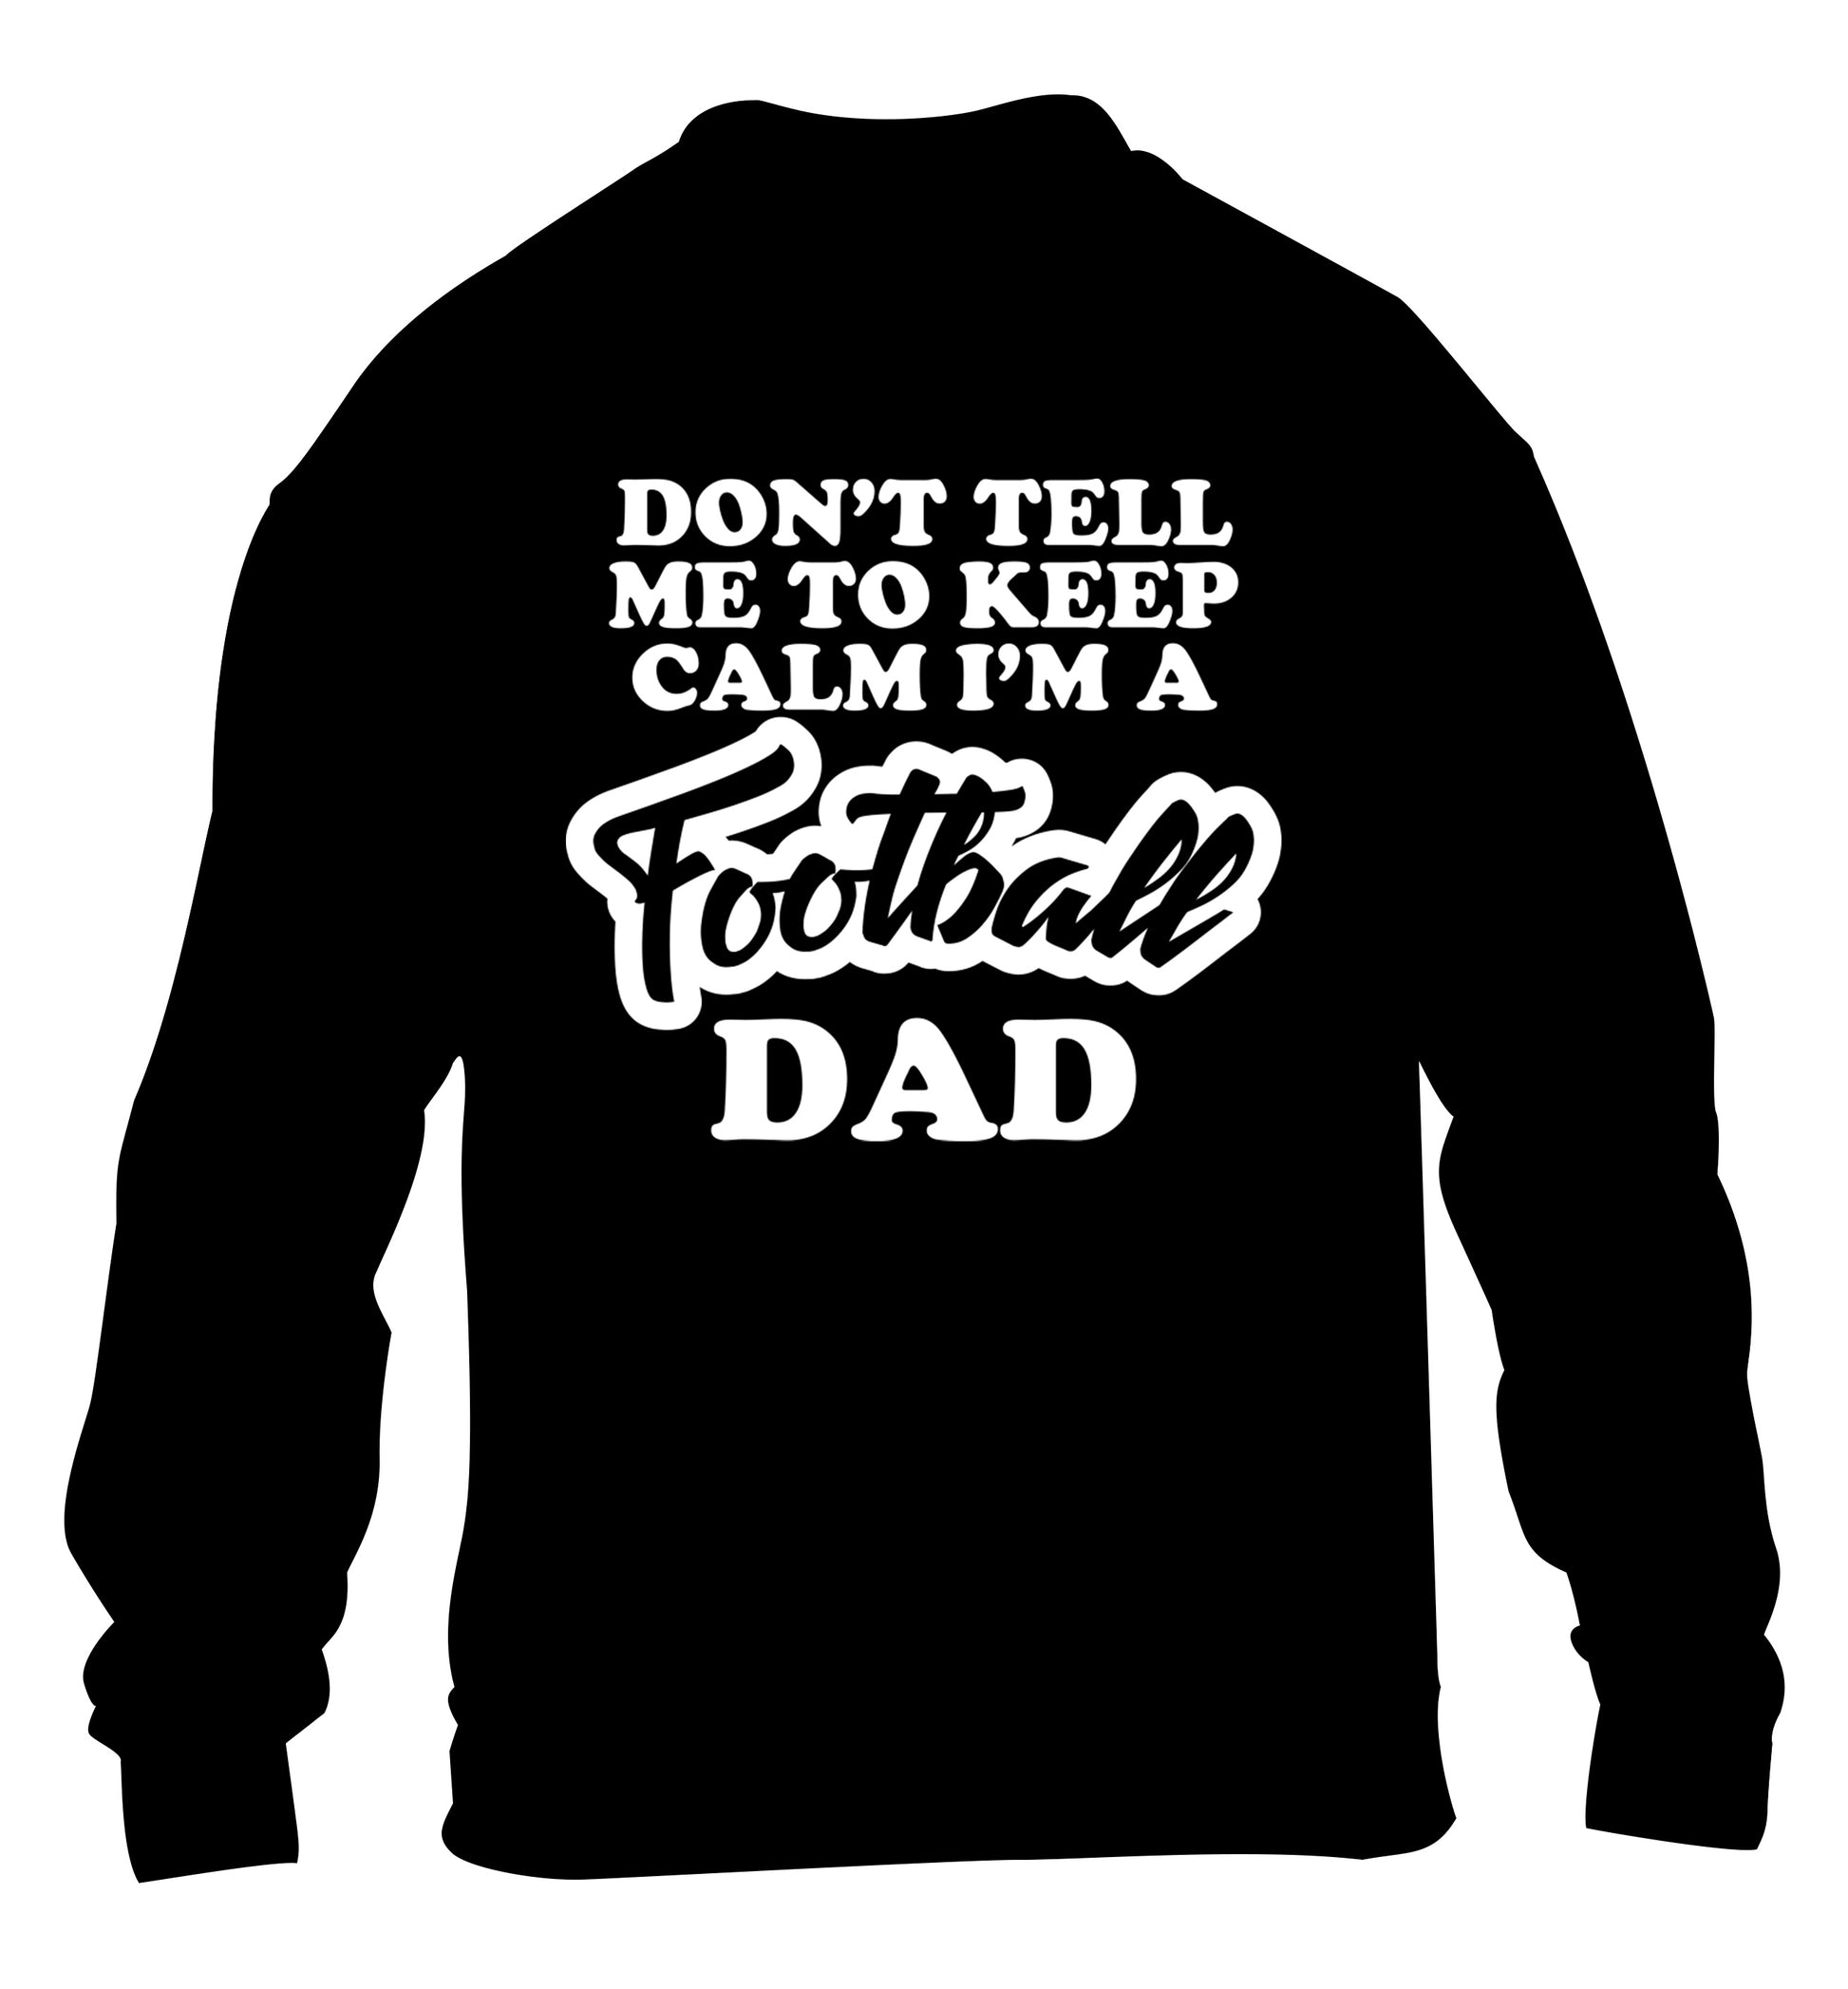 Don't tell me to keep calm I'm a football dad children's black sweater 12-14 Years